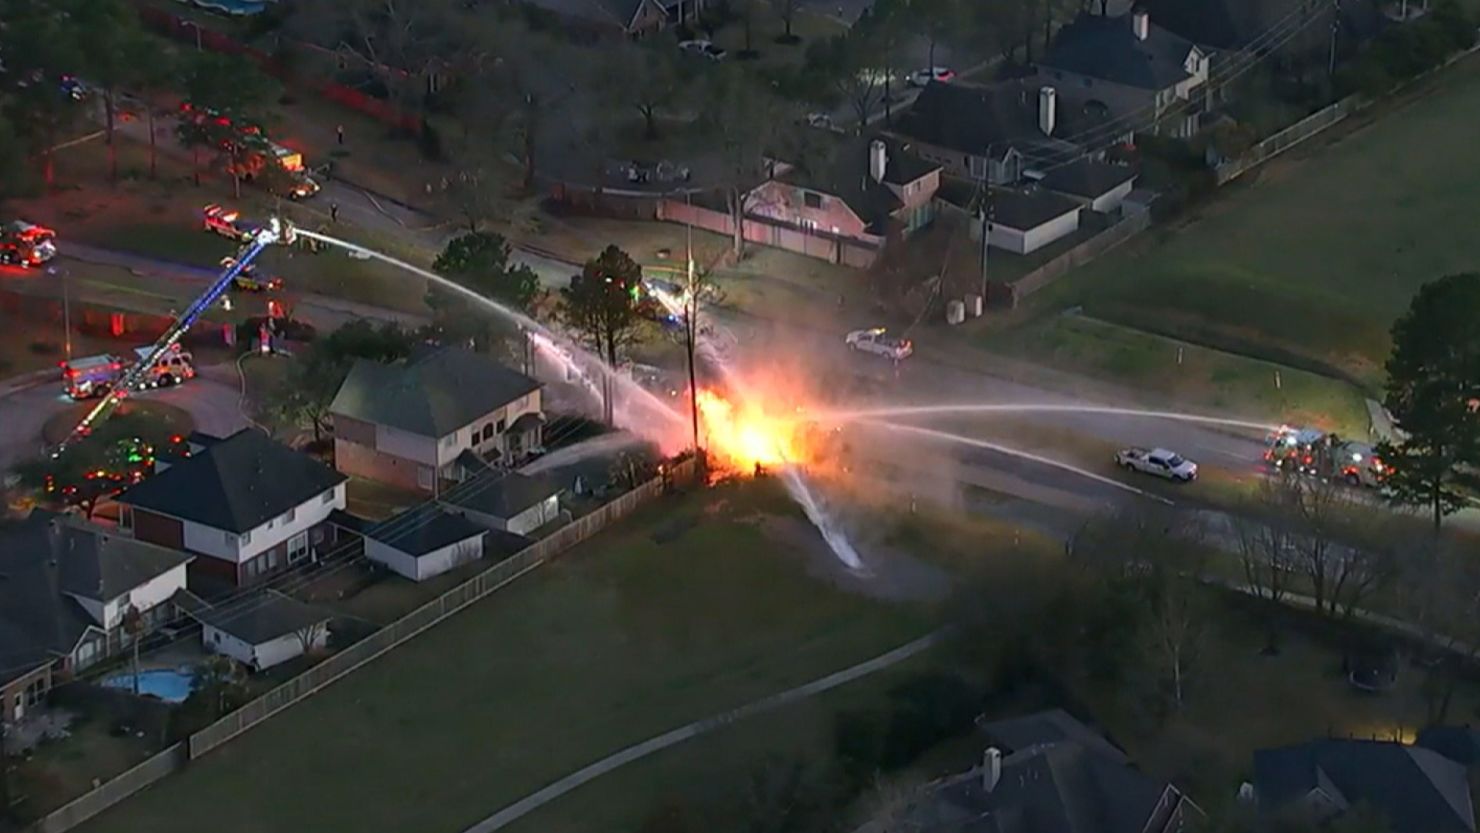 At least six energy company employees were injured after a "natural gas incident" in Gleannloch Farms near Spring, Texas, on March 5.